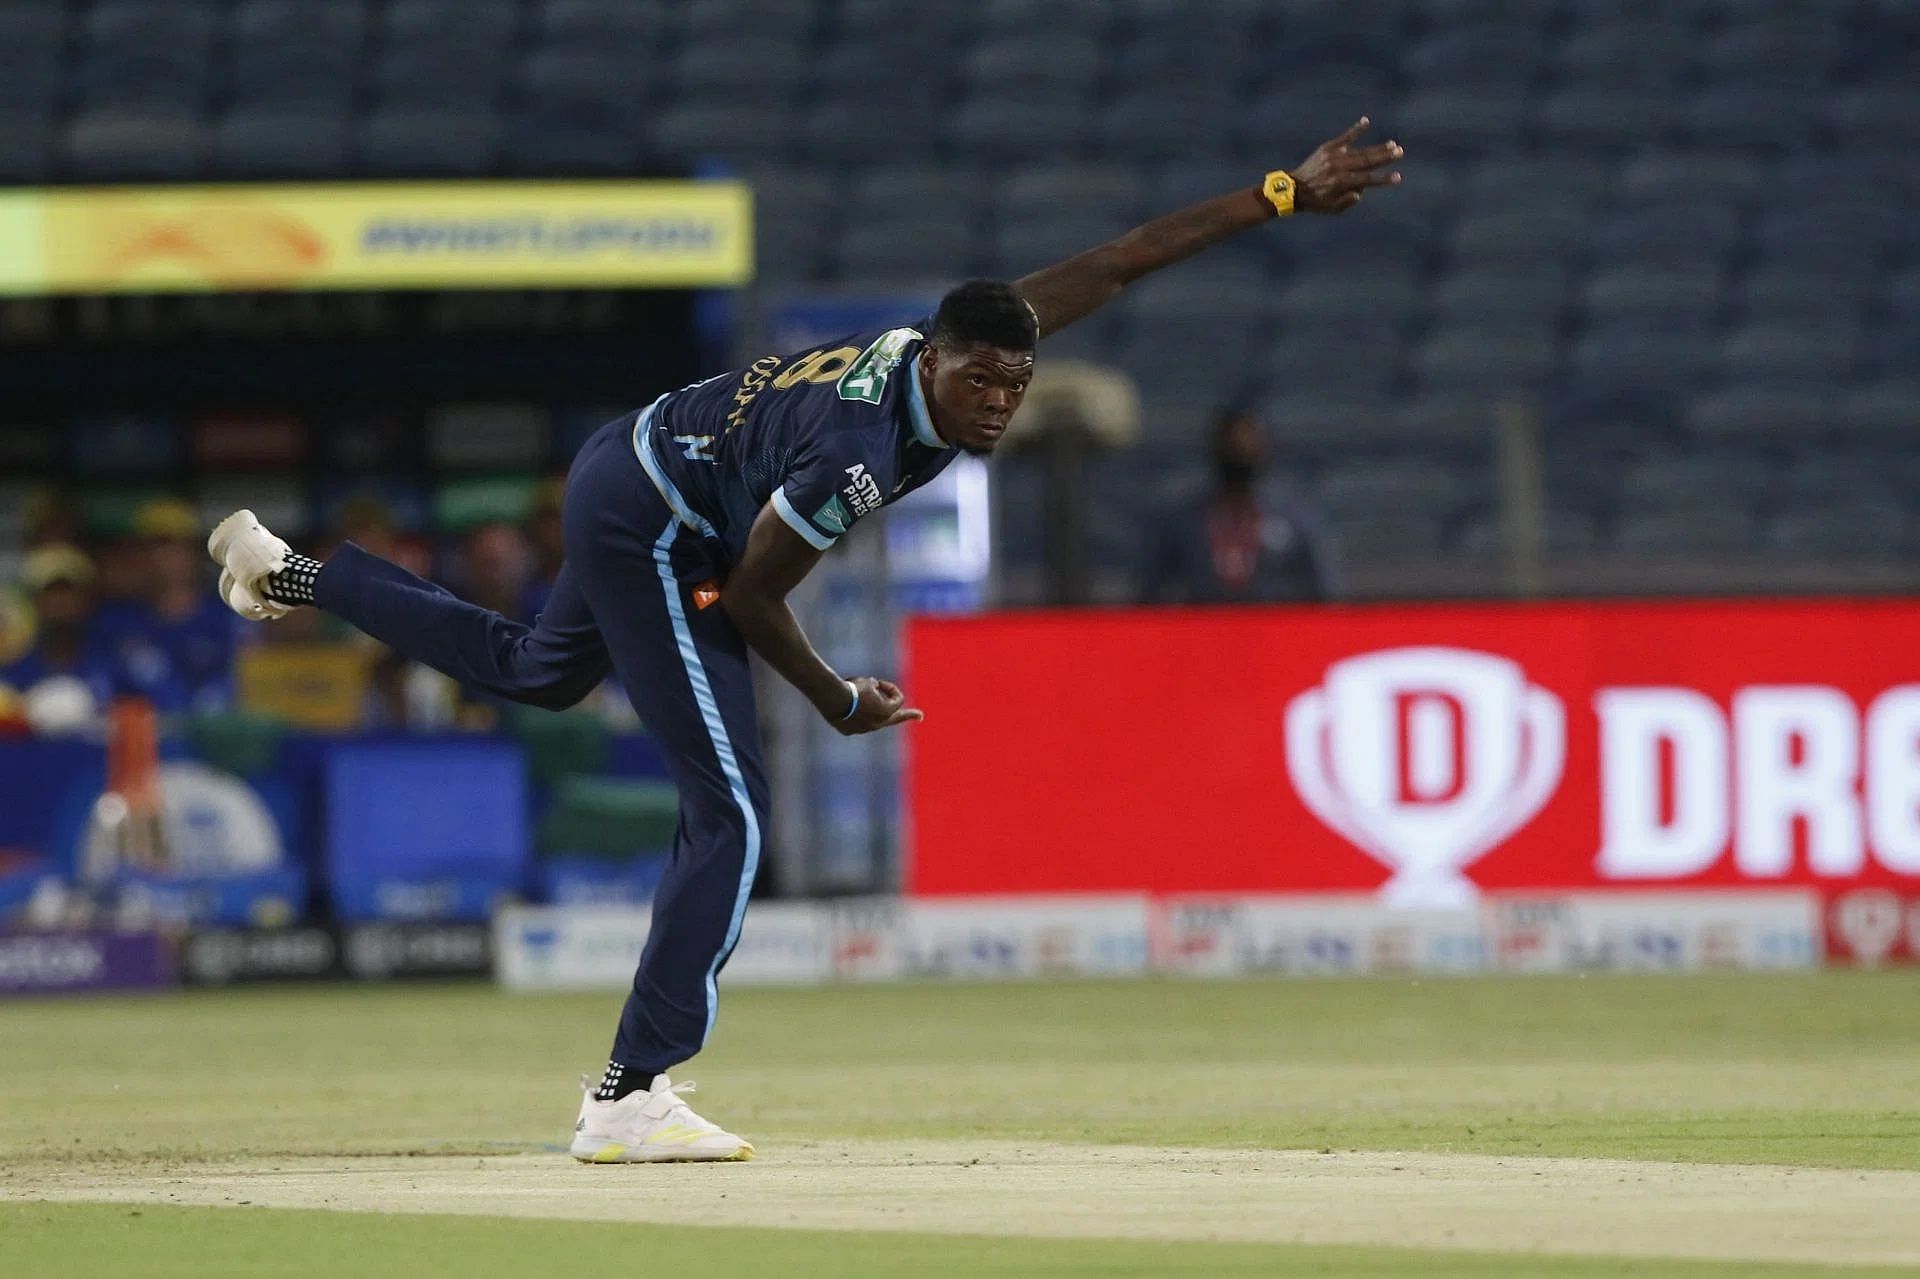 RCB acquired Alzarri Joseph for a whopping ₹11.50 crore. [P/C: AFP]